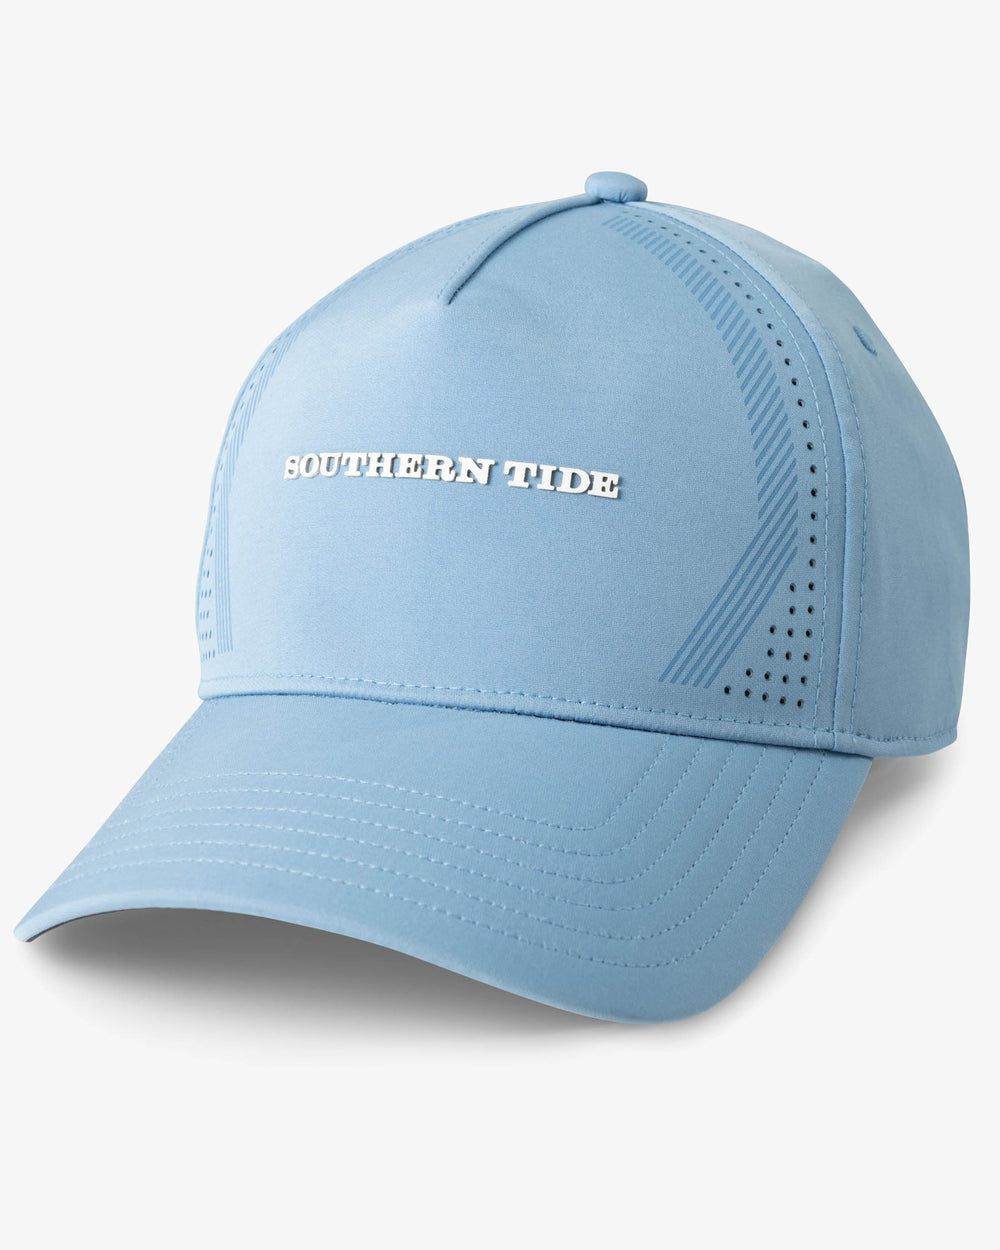 The front view of the Garrison Perforated Performance Hat by Southern Tide - Light Blue